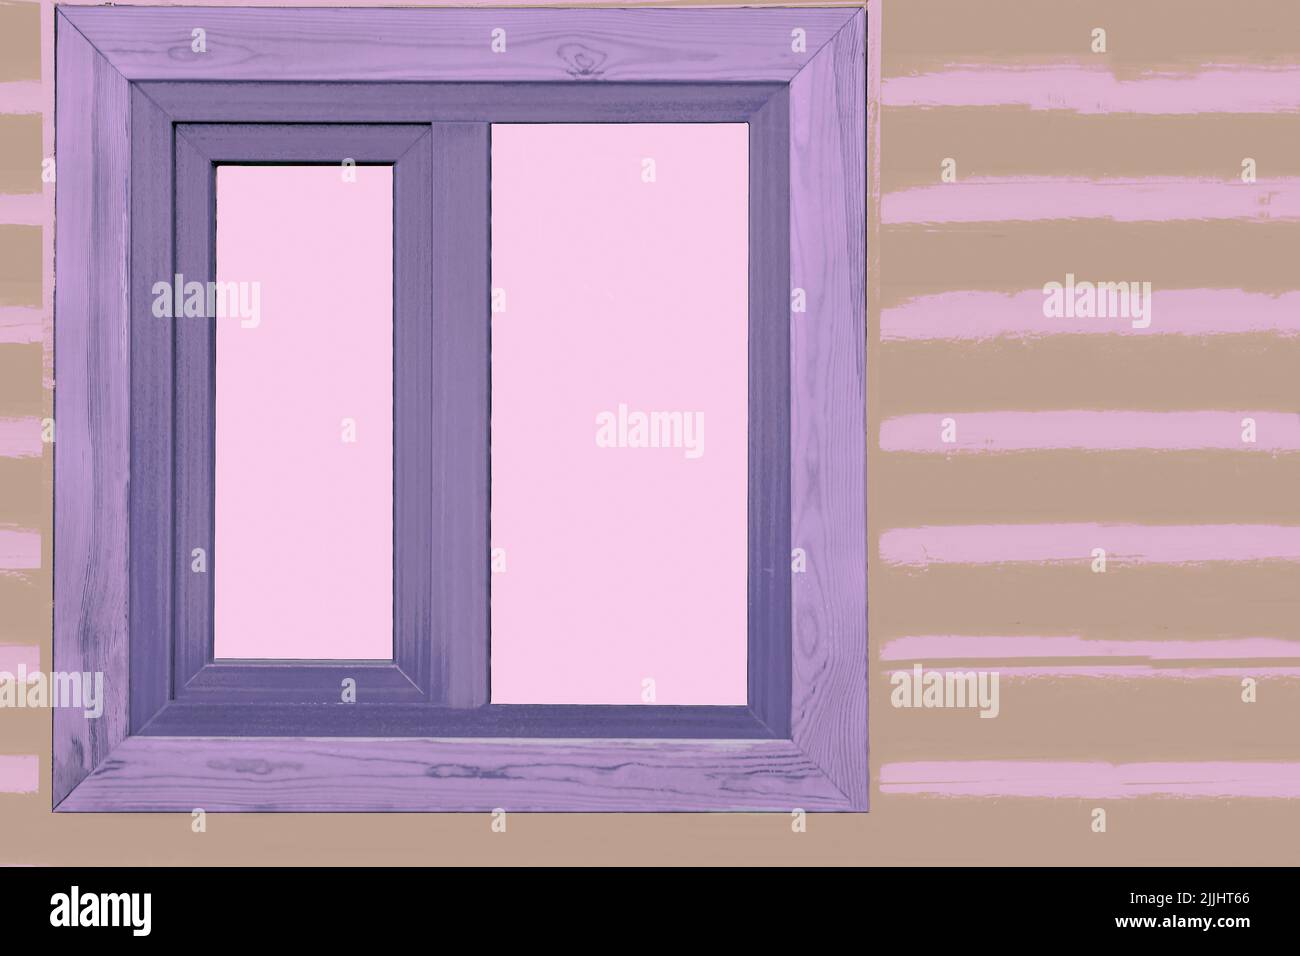 Pink window in a wooden lilac frame in a wooden wall of pink brown logs timbers. Stock Photo